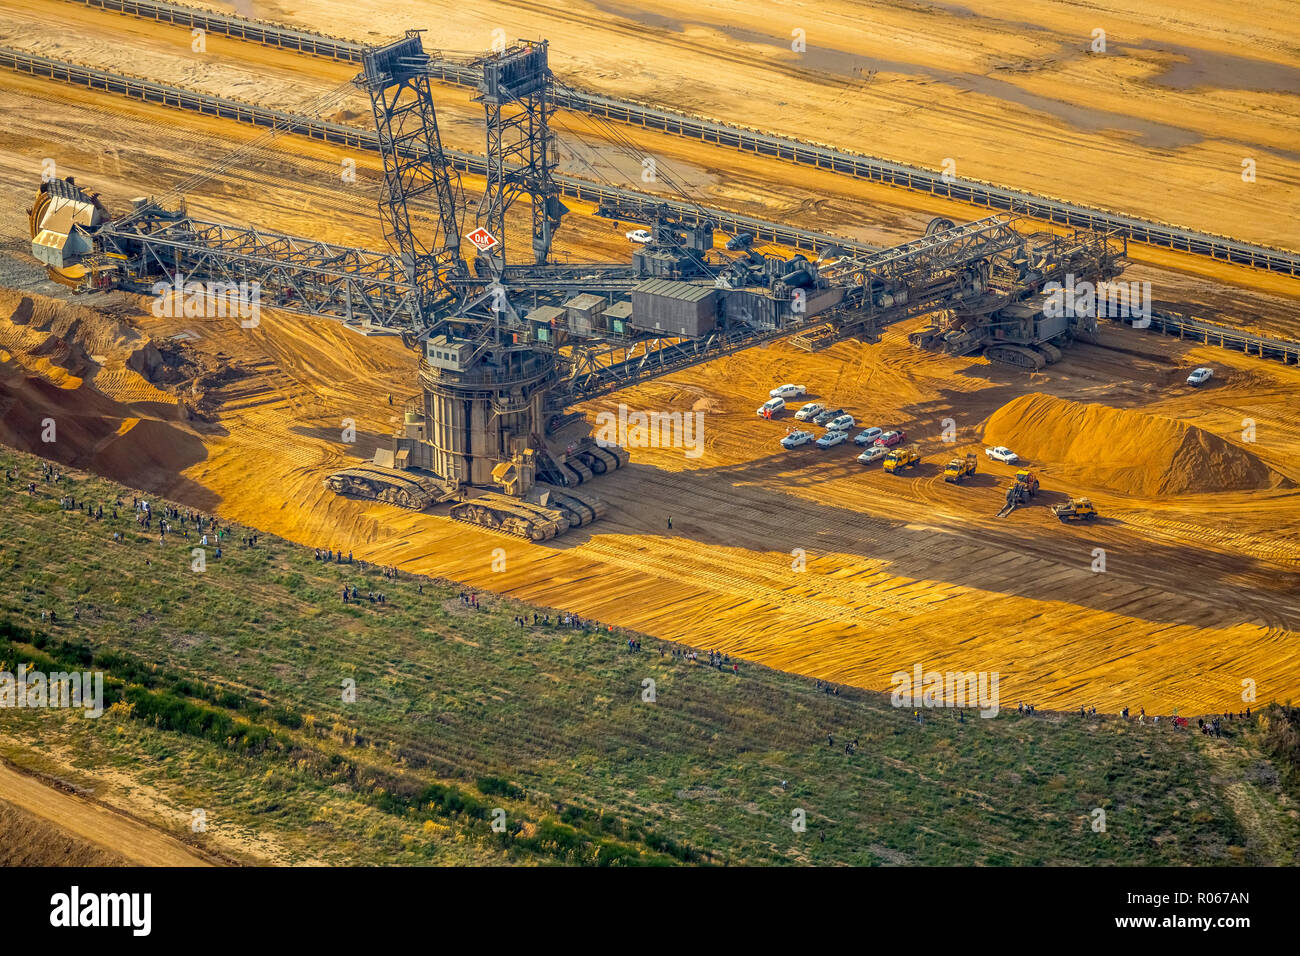 Lignite excavator, aerial photograph, large demonstration against the clearing of the Hambacher forest, Hambach, Hambacher forest, Etzweiler, Elsdorf, Stock Photo